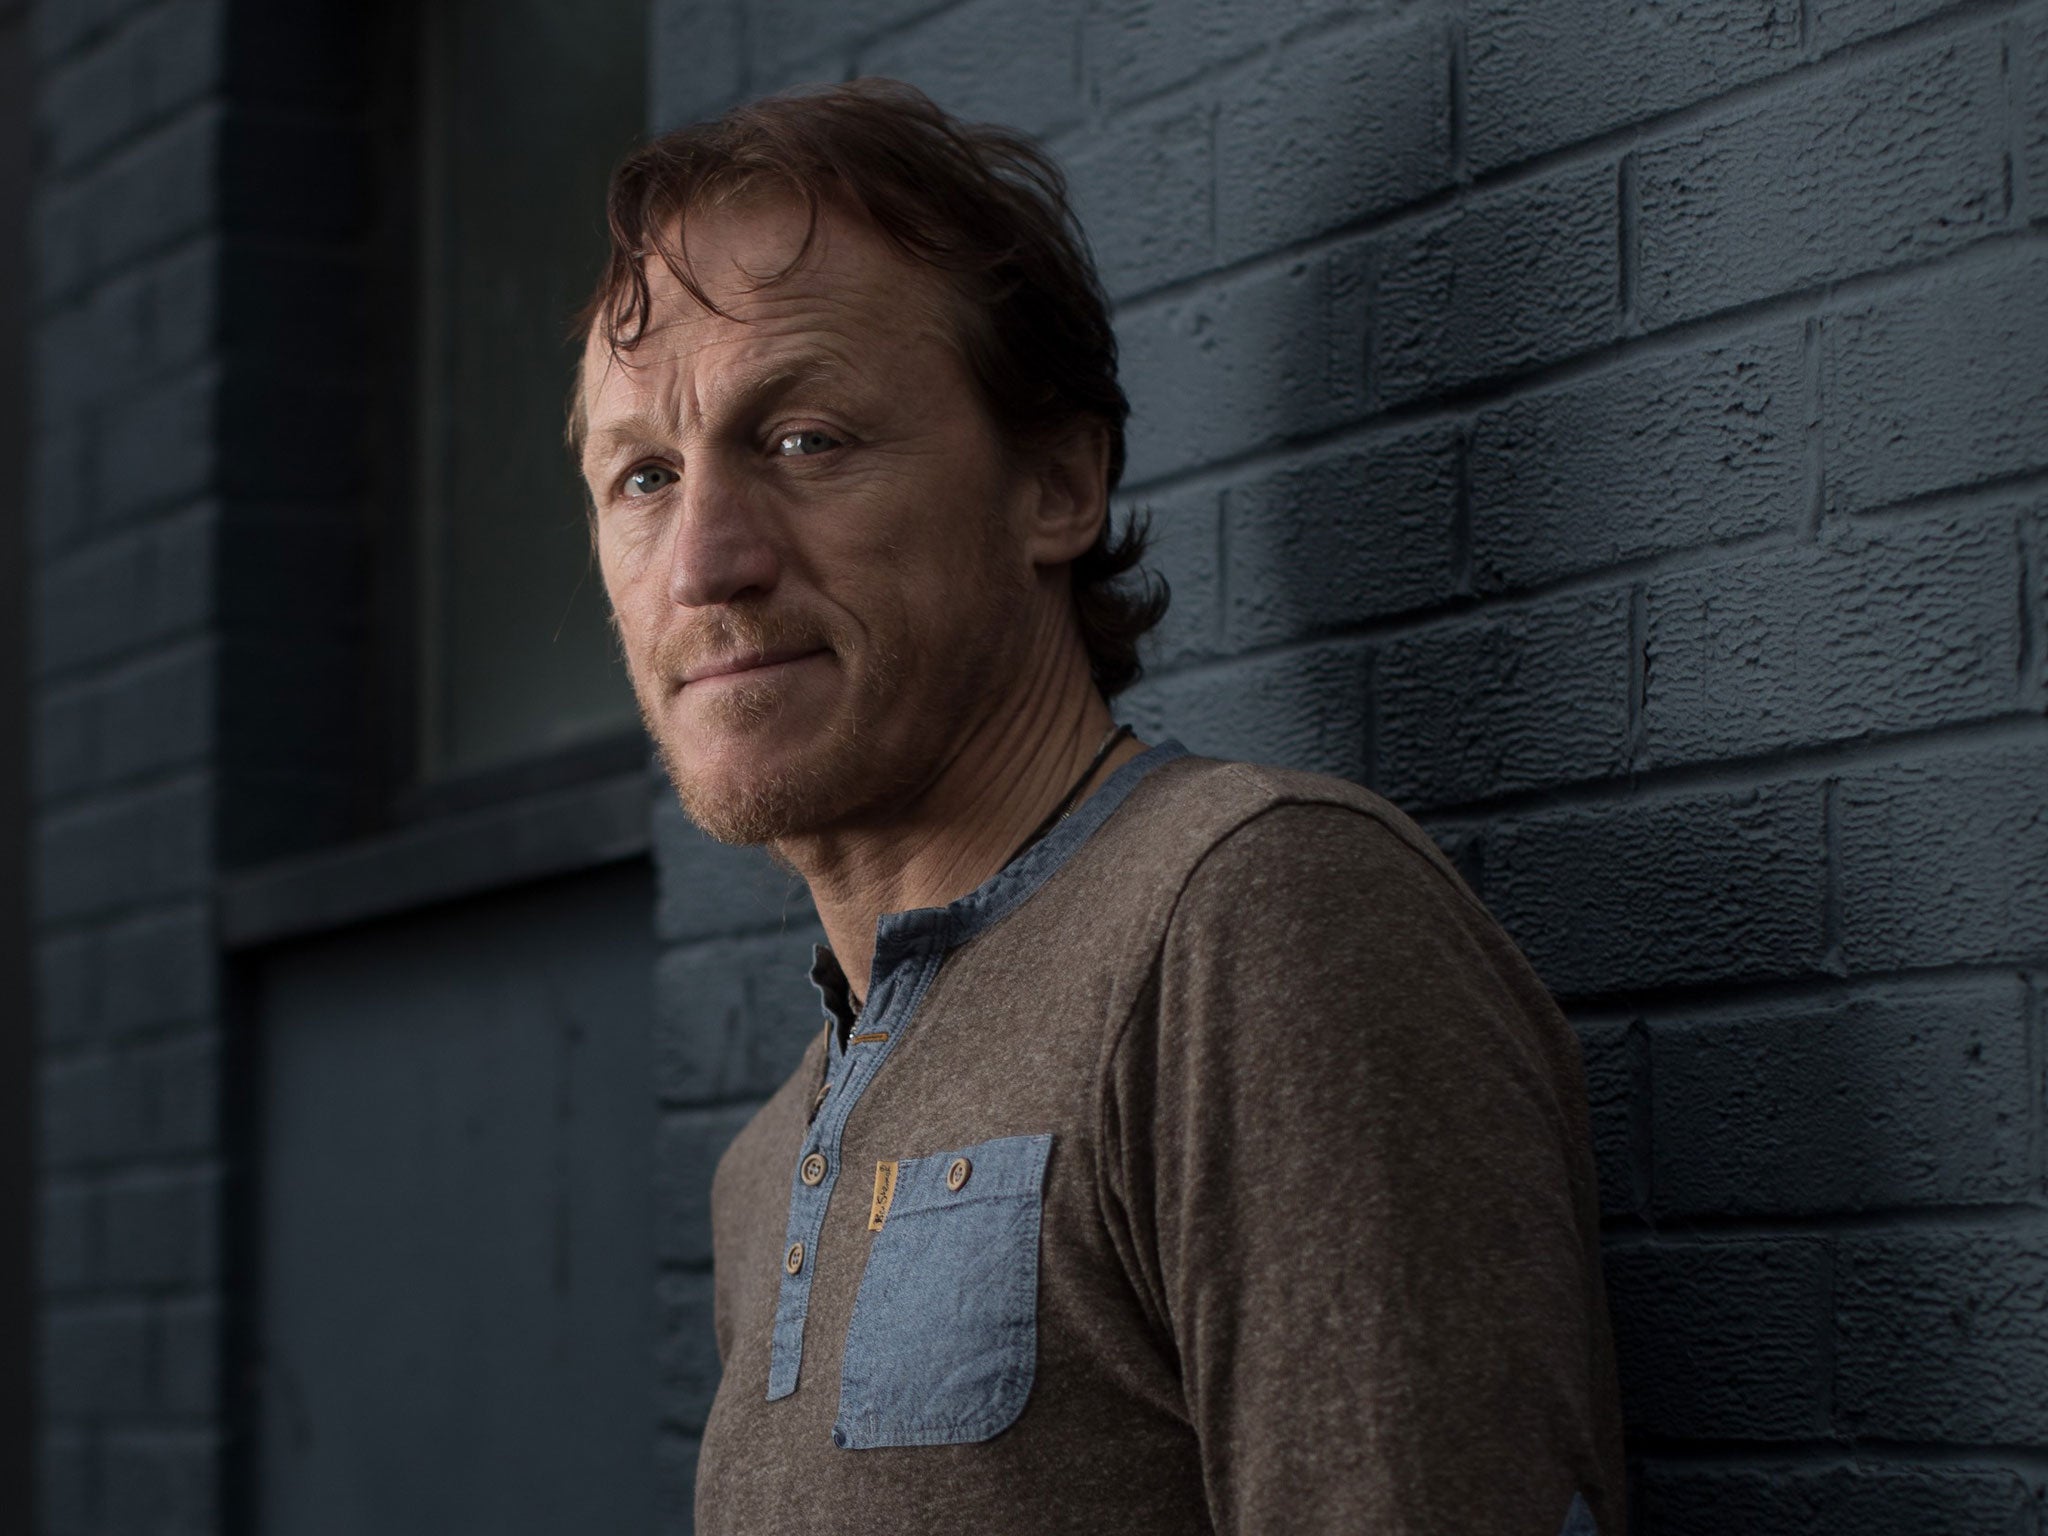 Jerome Flynn, of Robson & Jerome fame in the 90s - he now stars in Game of Thrones and is back on screen in the BBC's Ripper Street